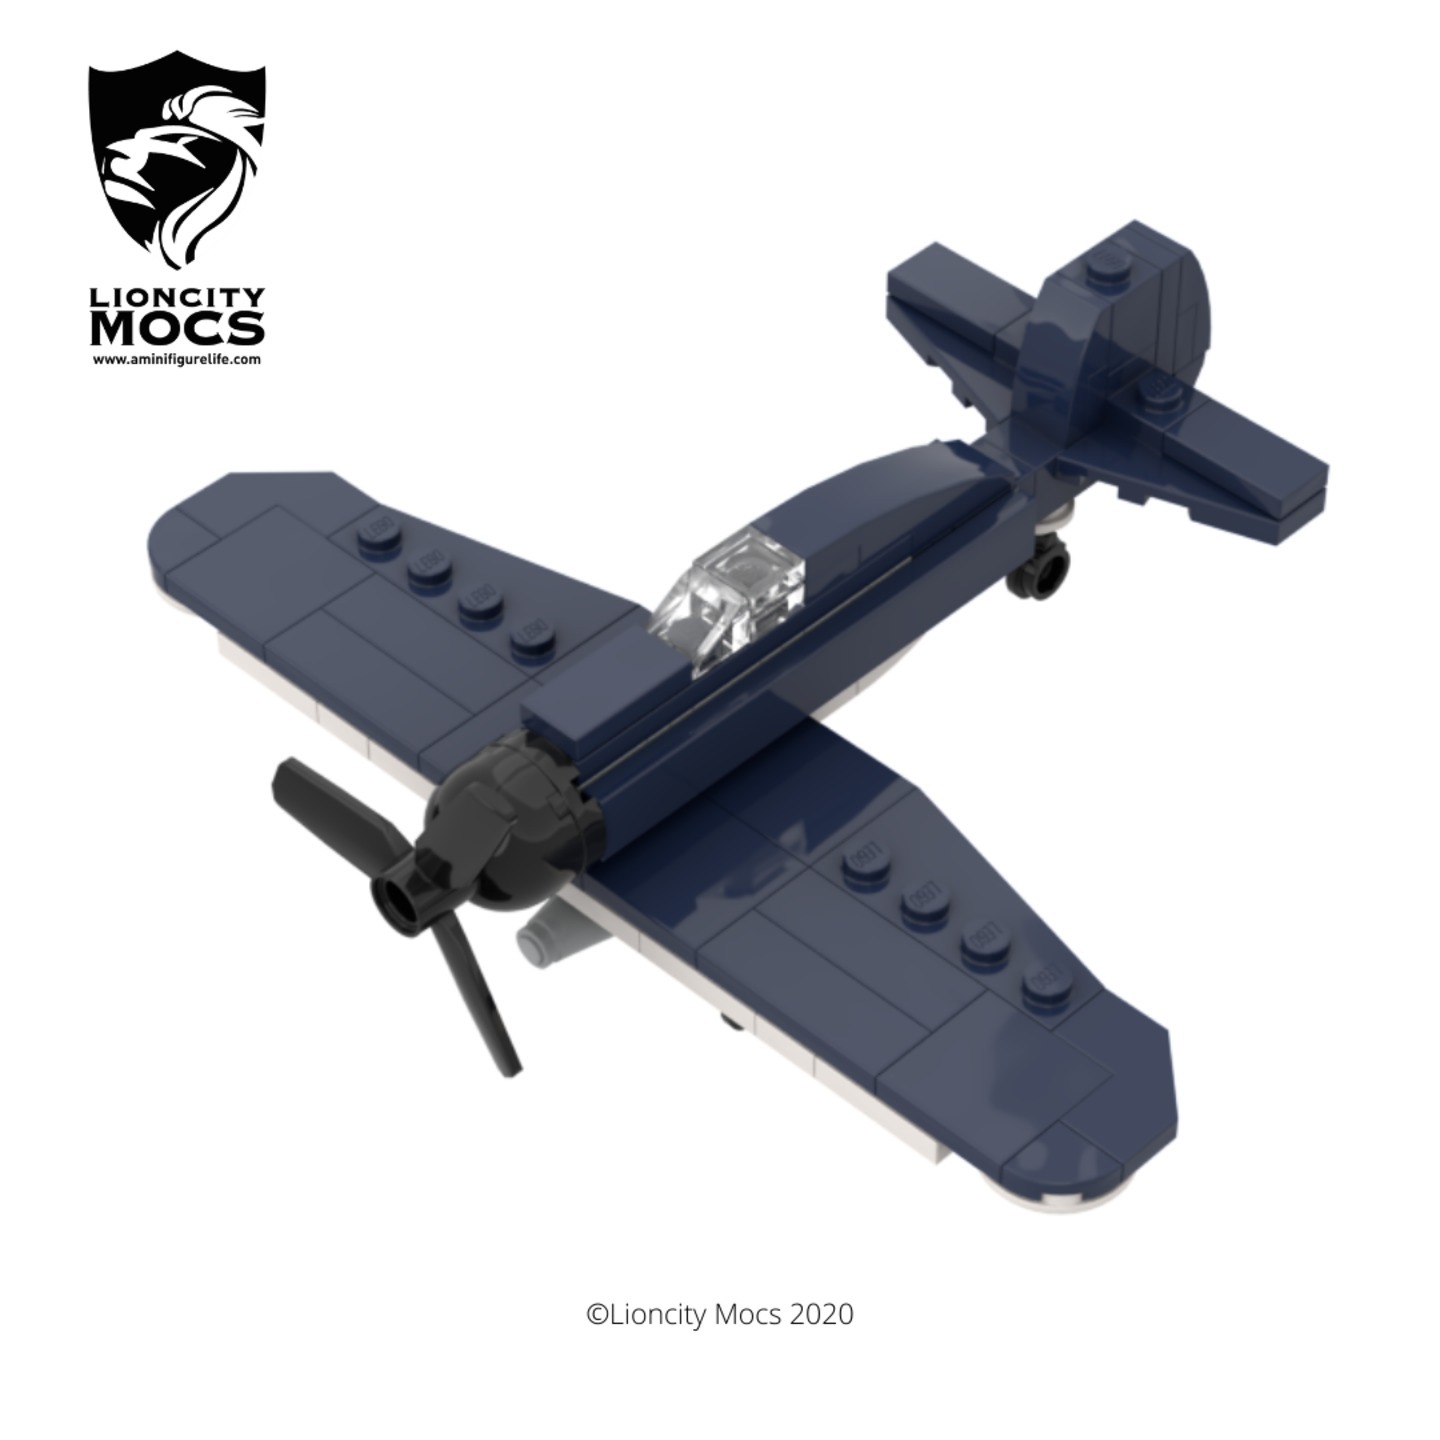 [PDF Instructions Only] Hellcat WWII Mini Aircraft